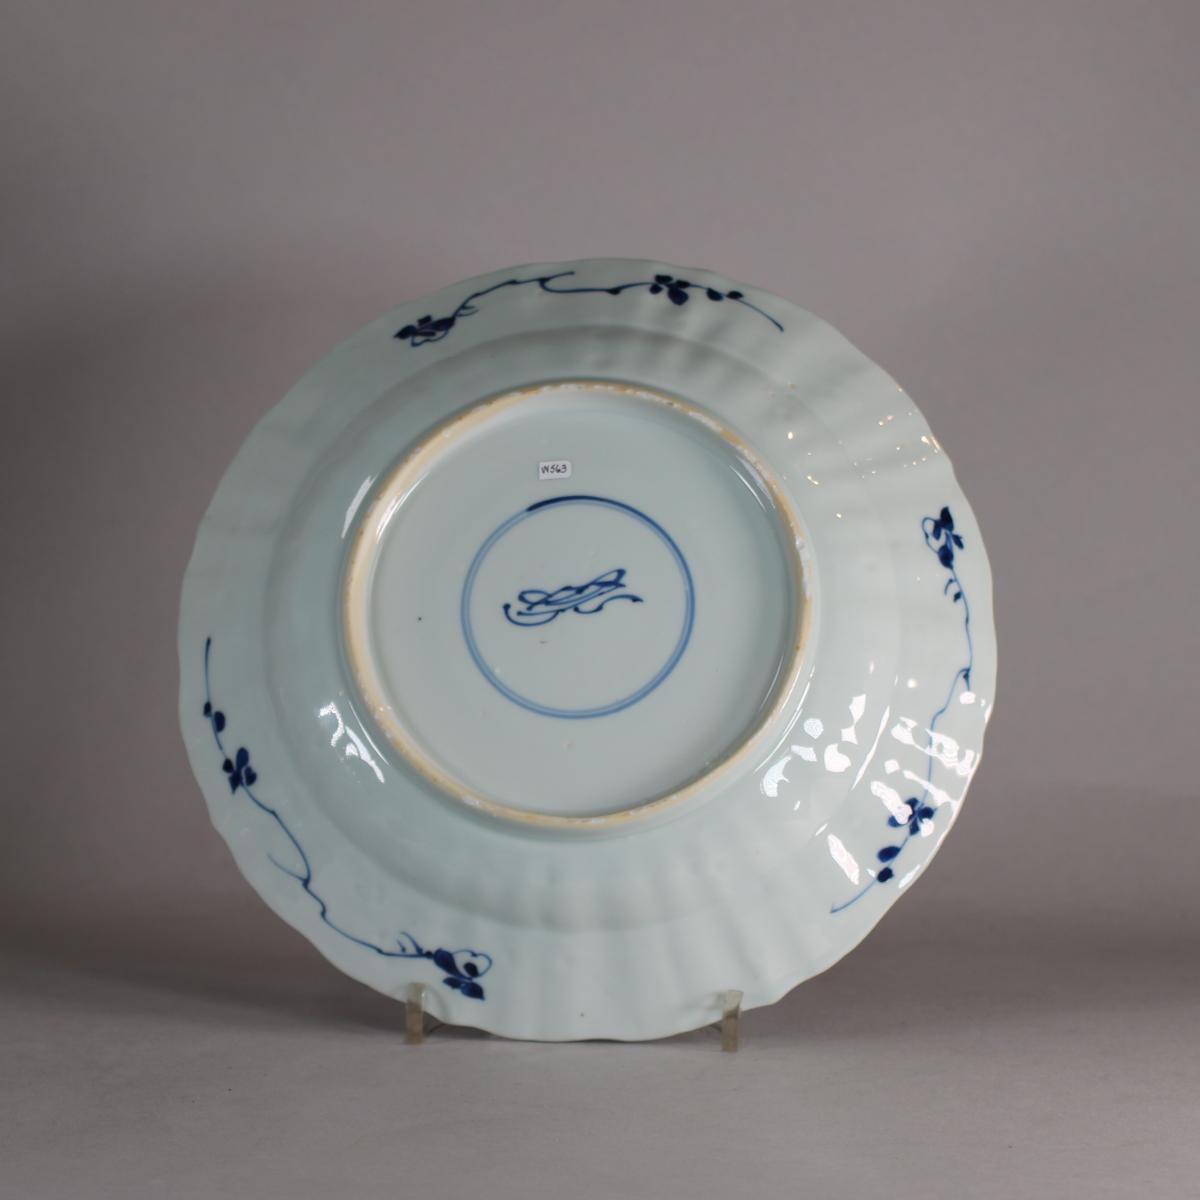 reverse image of kangxi blue and white plate